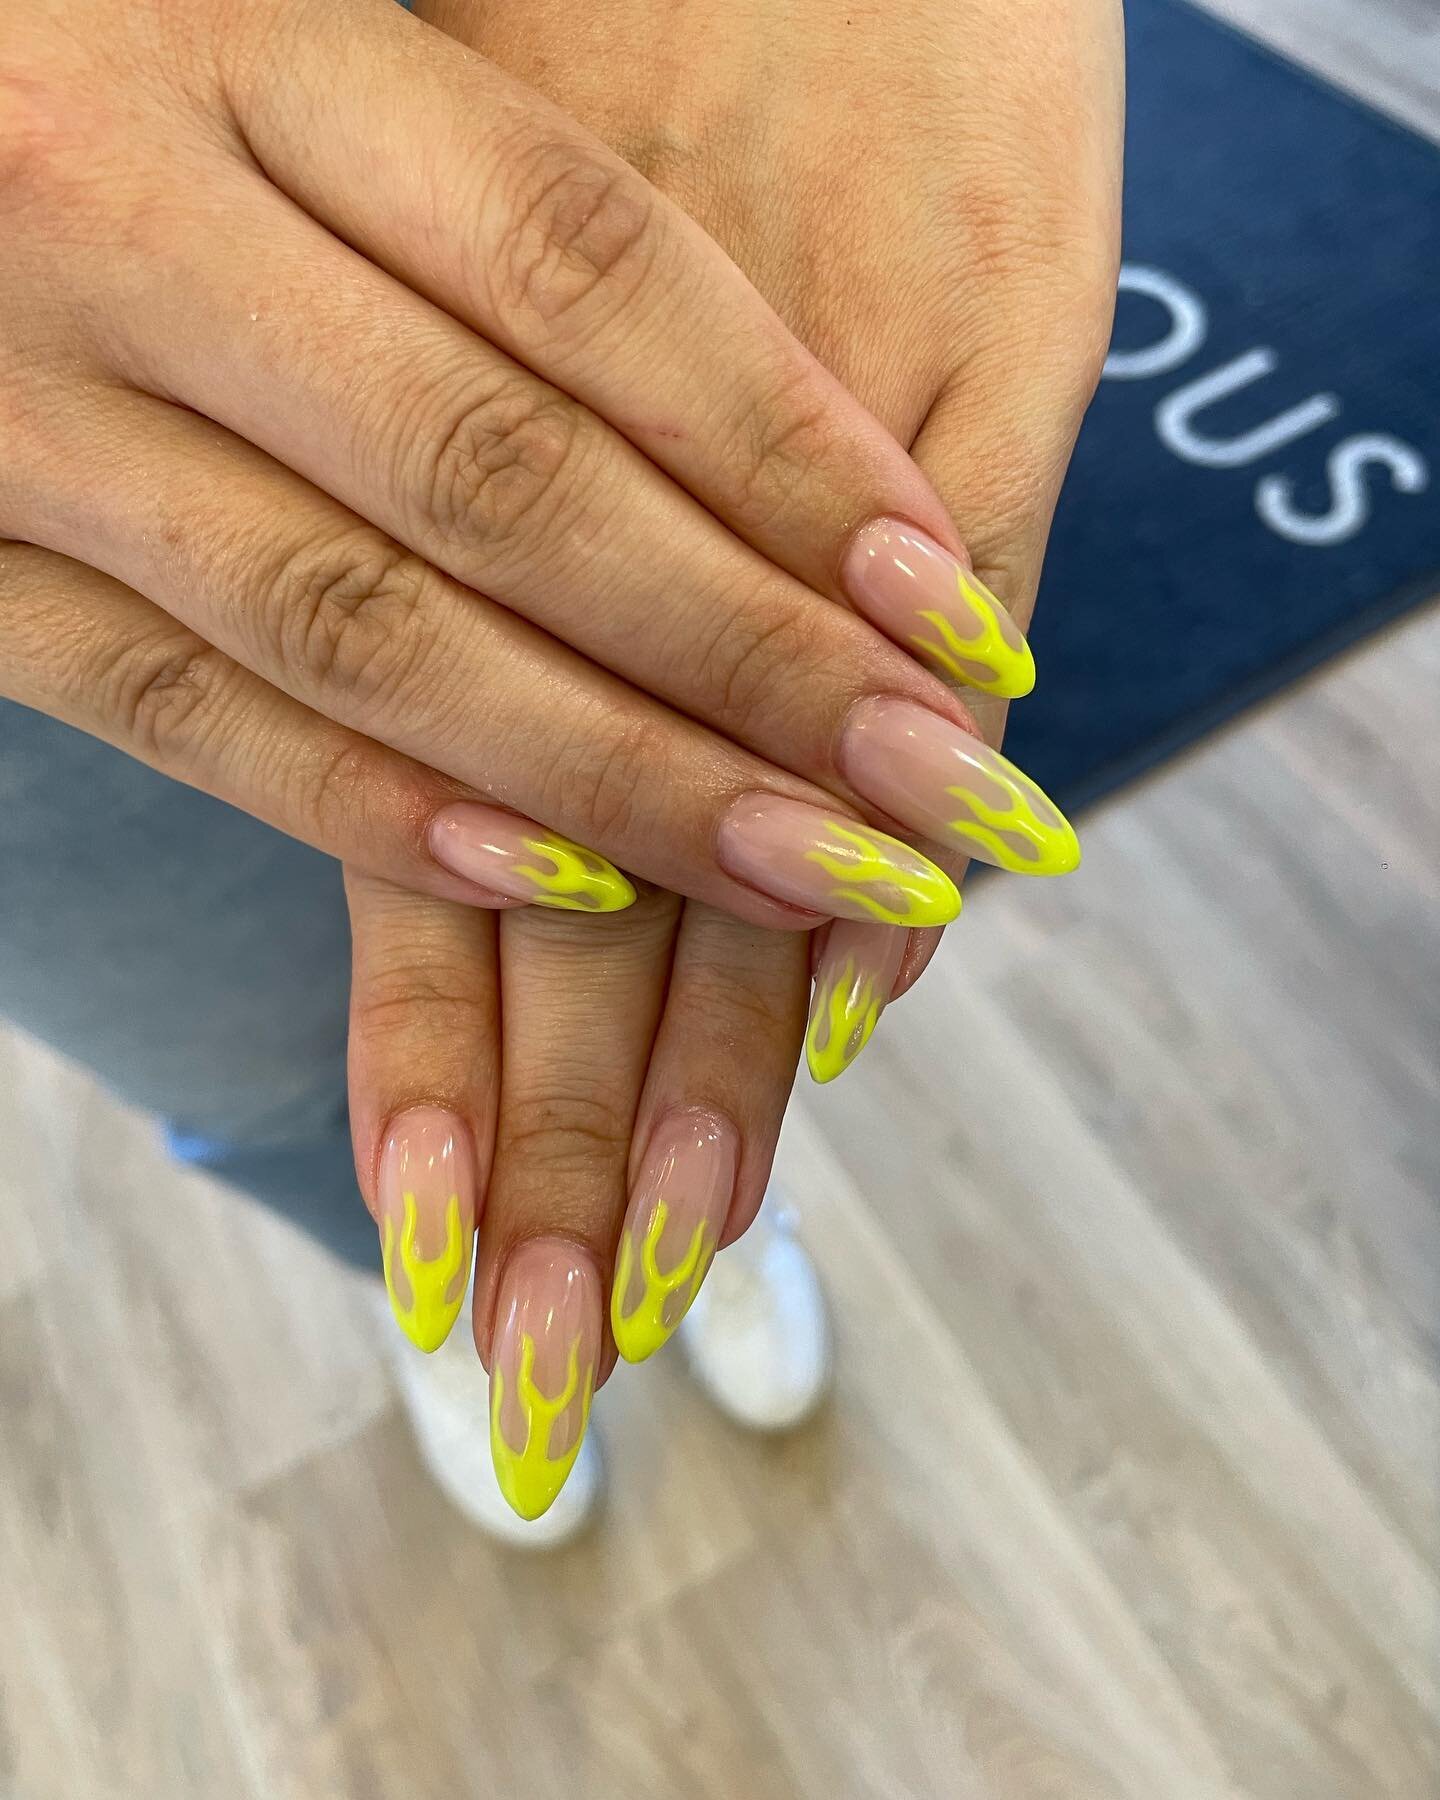 From cutesy strawberry nails to spicy neon flames. 5 weeks apart! Which personality are you letting choose your nails today? #nailinspo #hamiltonnailsalon #hamontnails